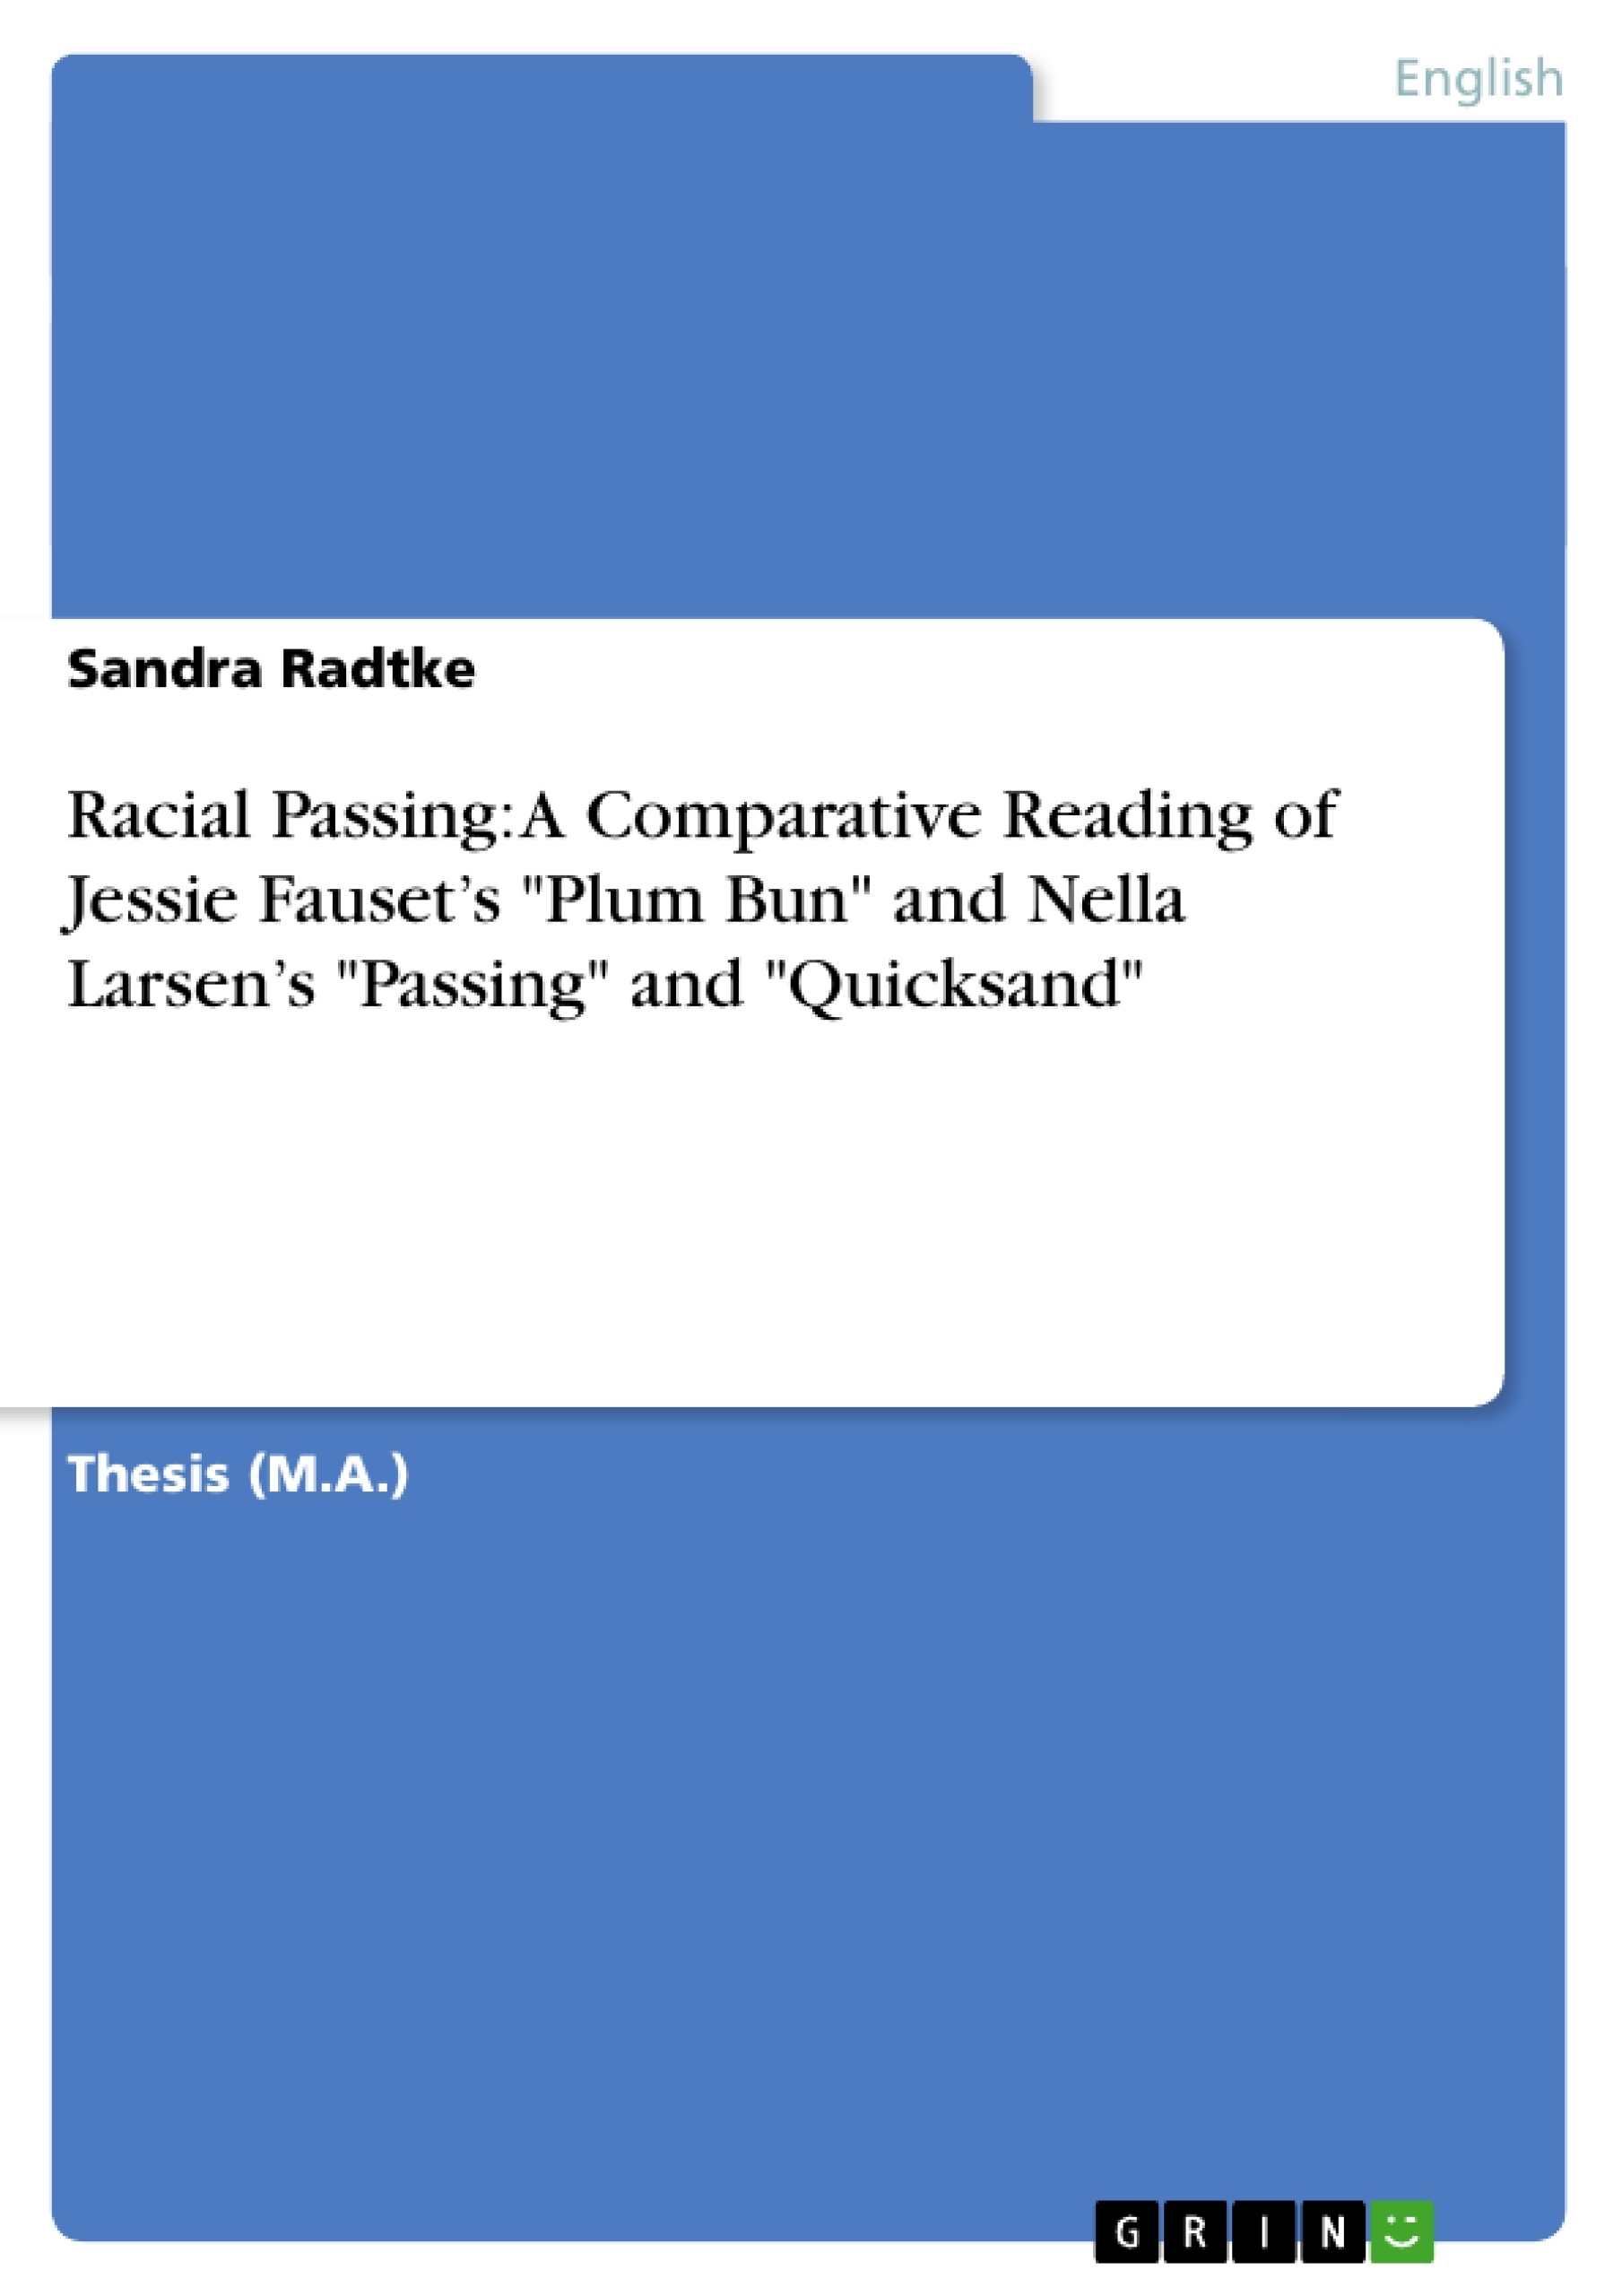 Titel: Racial Passing: A Comparative Reading of Jessie Fauset’s "Plum Bun" and Nella Larsen’s "Passing" and "Quicksand"